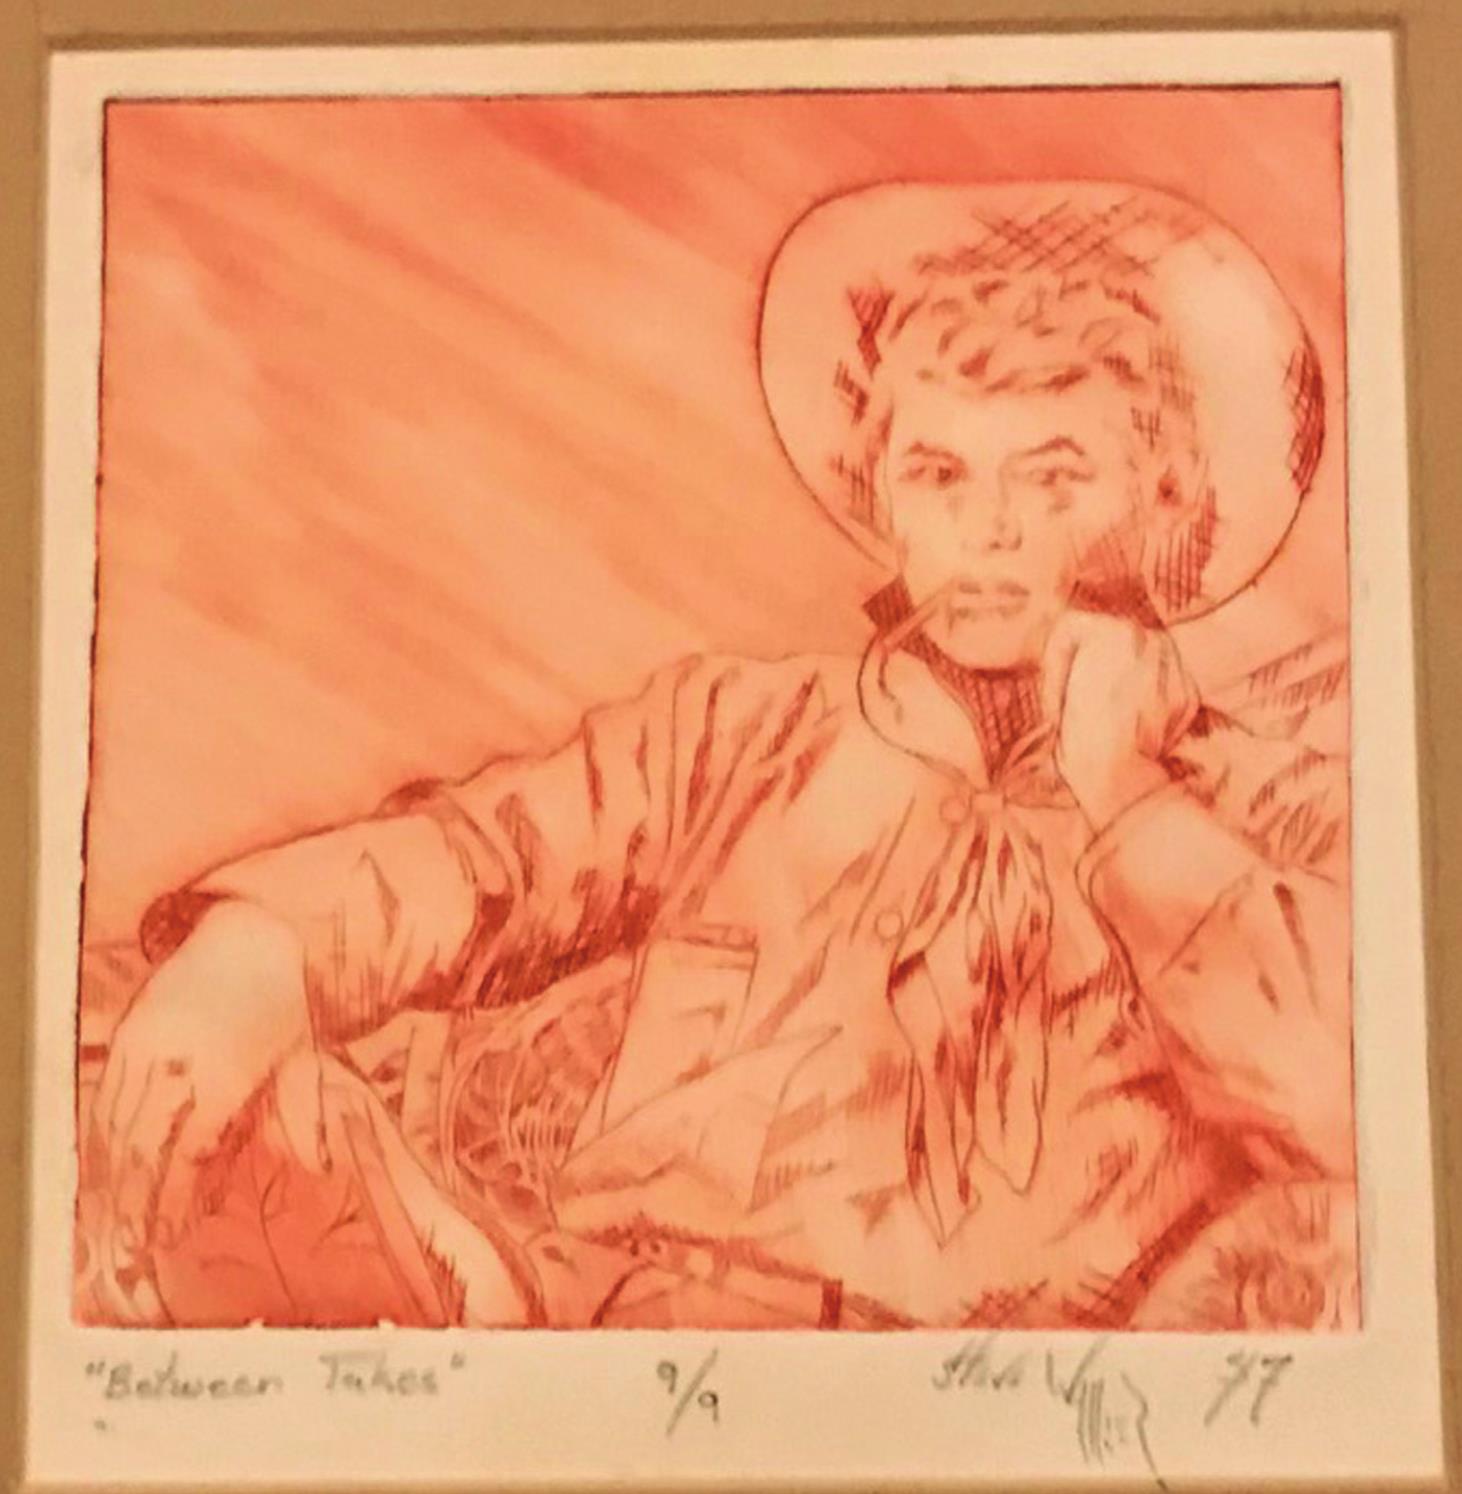 Provided Top right, shows a drawing created by Stephen Walker, of a cowboy in deep thought.